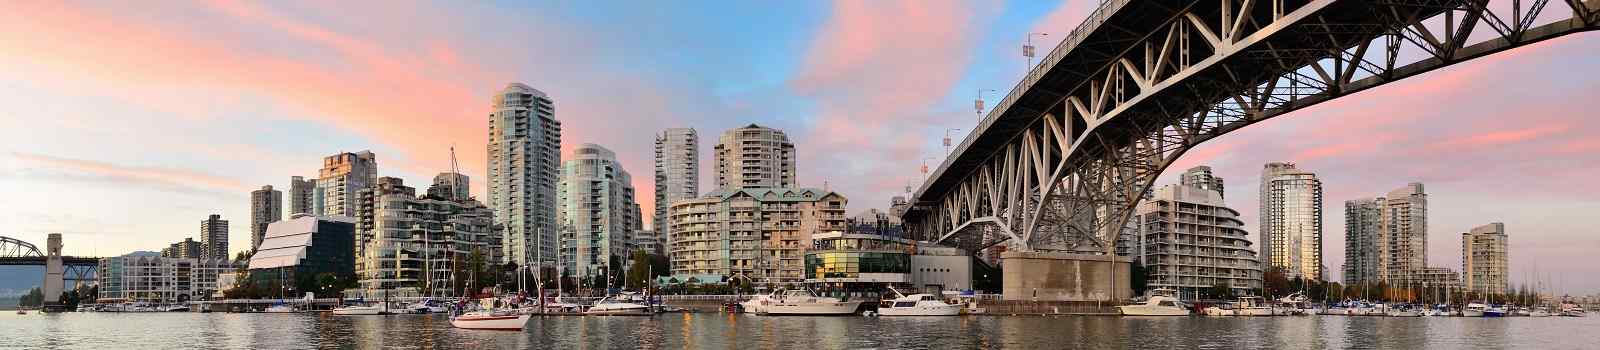 CAD-WEST-WAN Vancouver False Creek panorama at sunset with bridge and boat 438921508